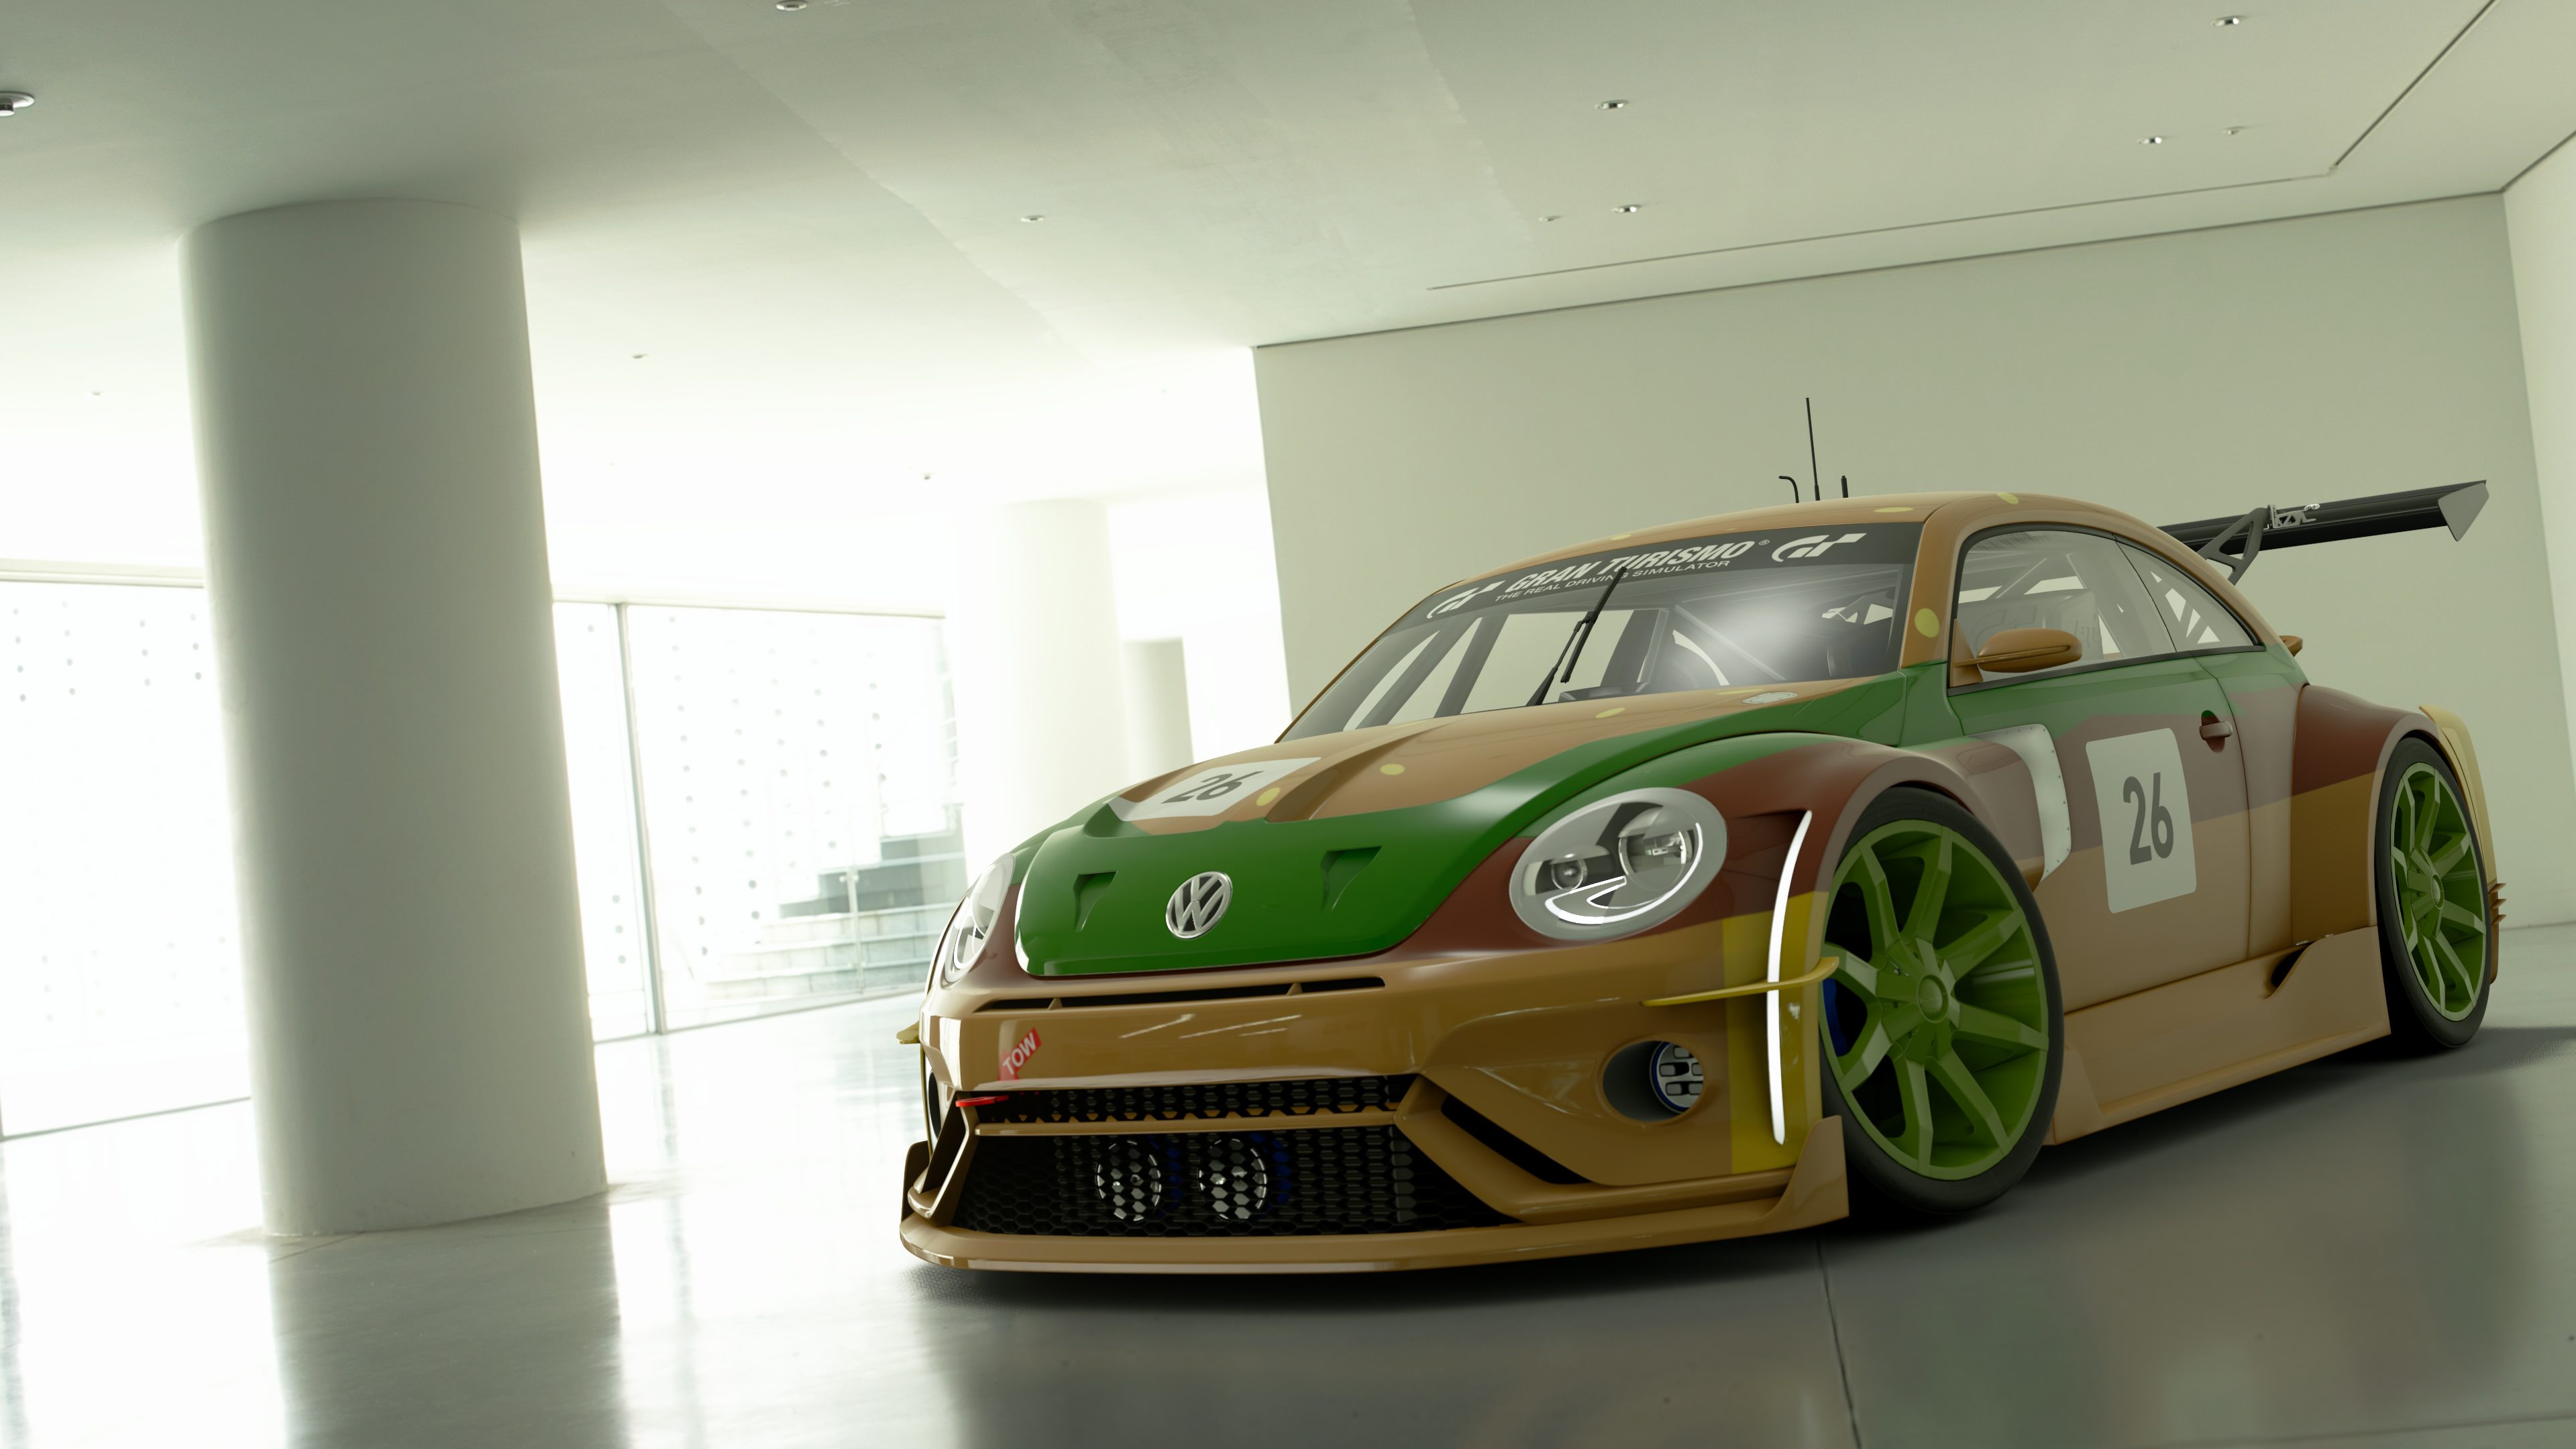 Guys, Kaz actually delivered and put the Patty Wagon in GT Sport!